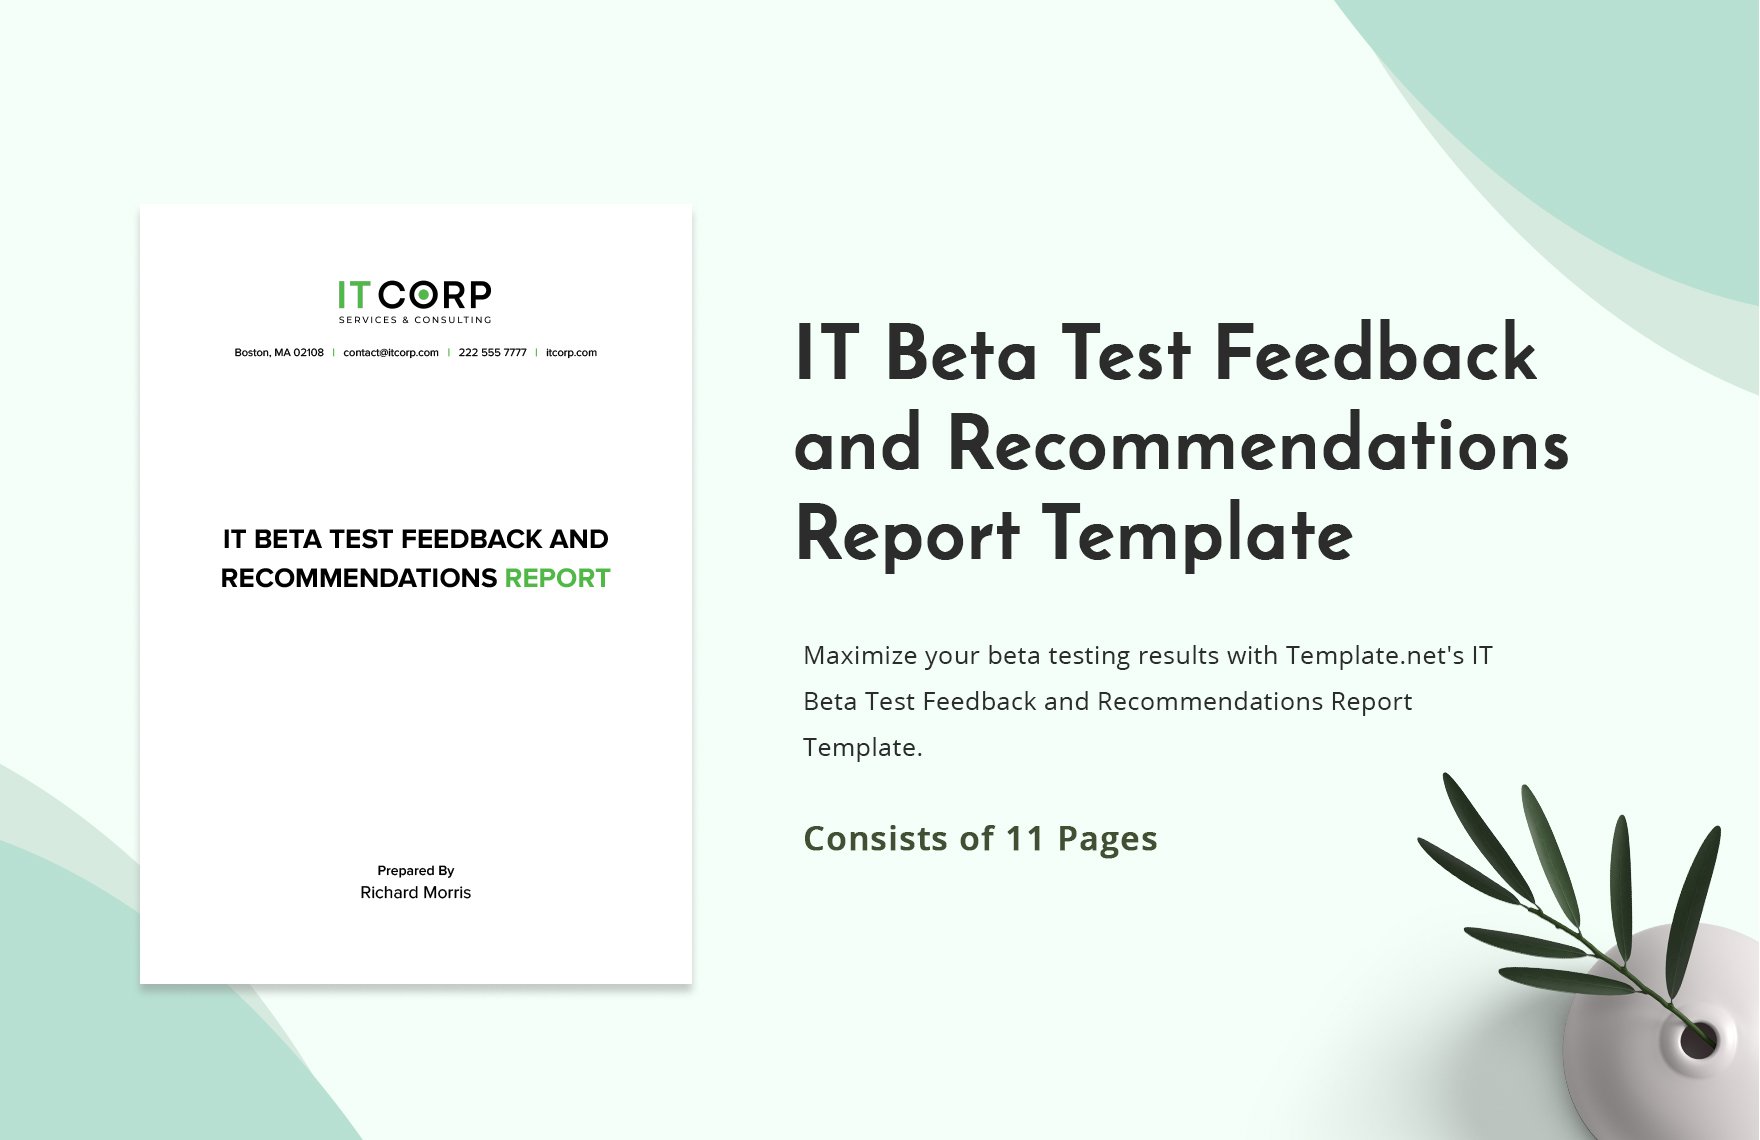 IT Beta Test Feedback and Recommendations Report Template